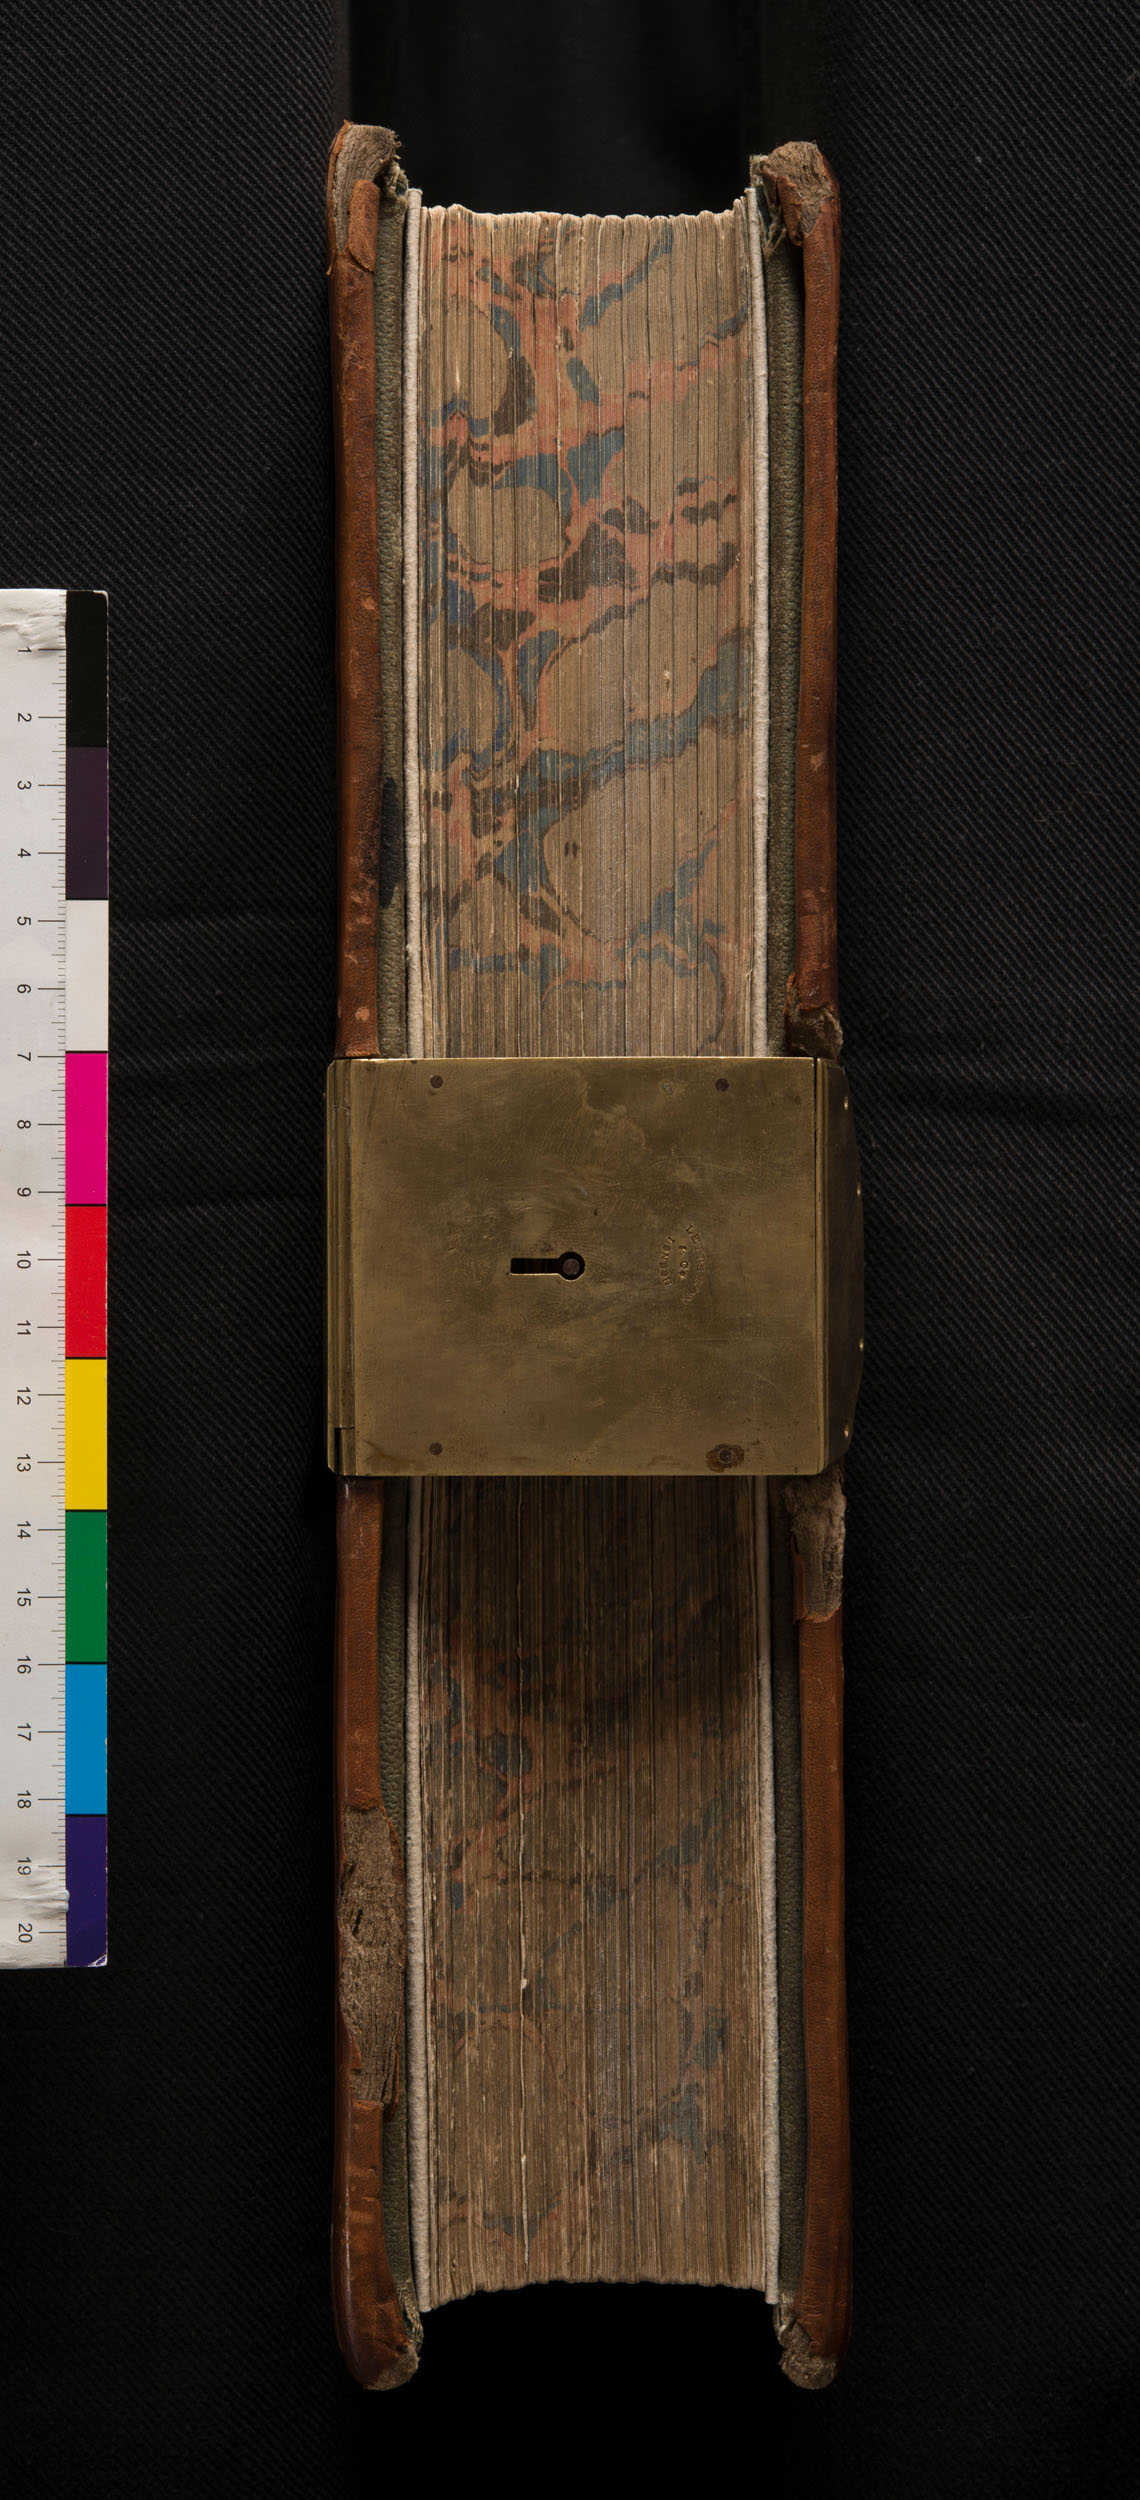 An image of the fore edge of the Unyanyembe Journal (Livingstone 1866-72:[776]). Copyright David Livingstone Centre. Creative Commons Attribution-NonCommercial 3.0 Unported (https://creativecommons.org/licenses/by-nc/3.0/).